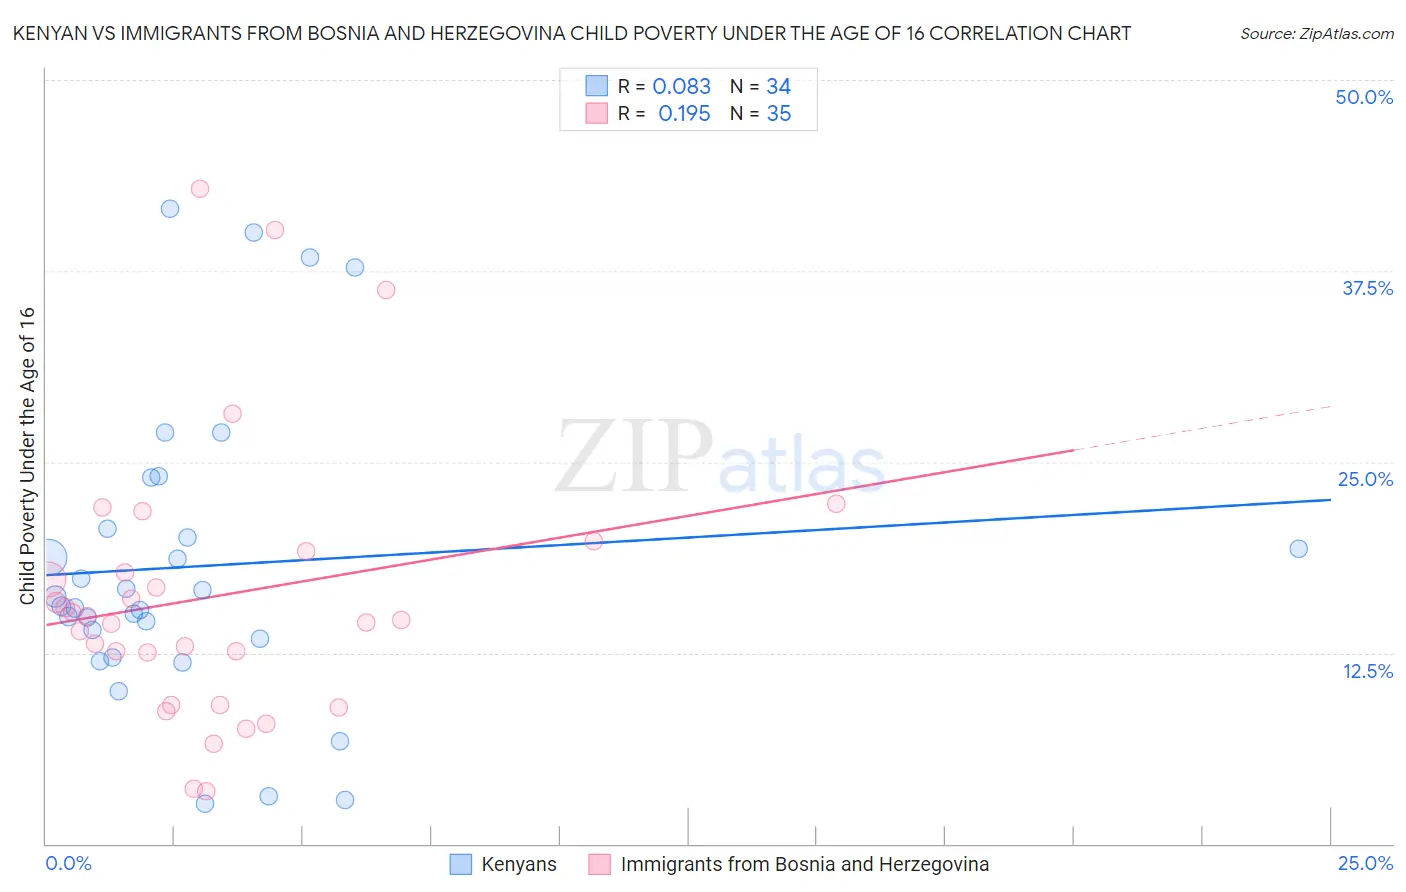 Kenyan vs Immigrants from Bosnia and Herzegovina Child Poverty Under the Age of 16